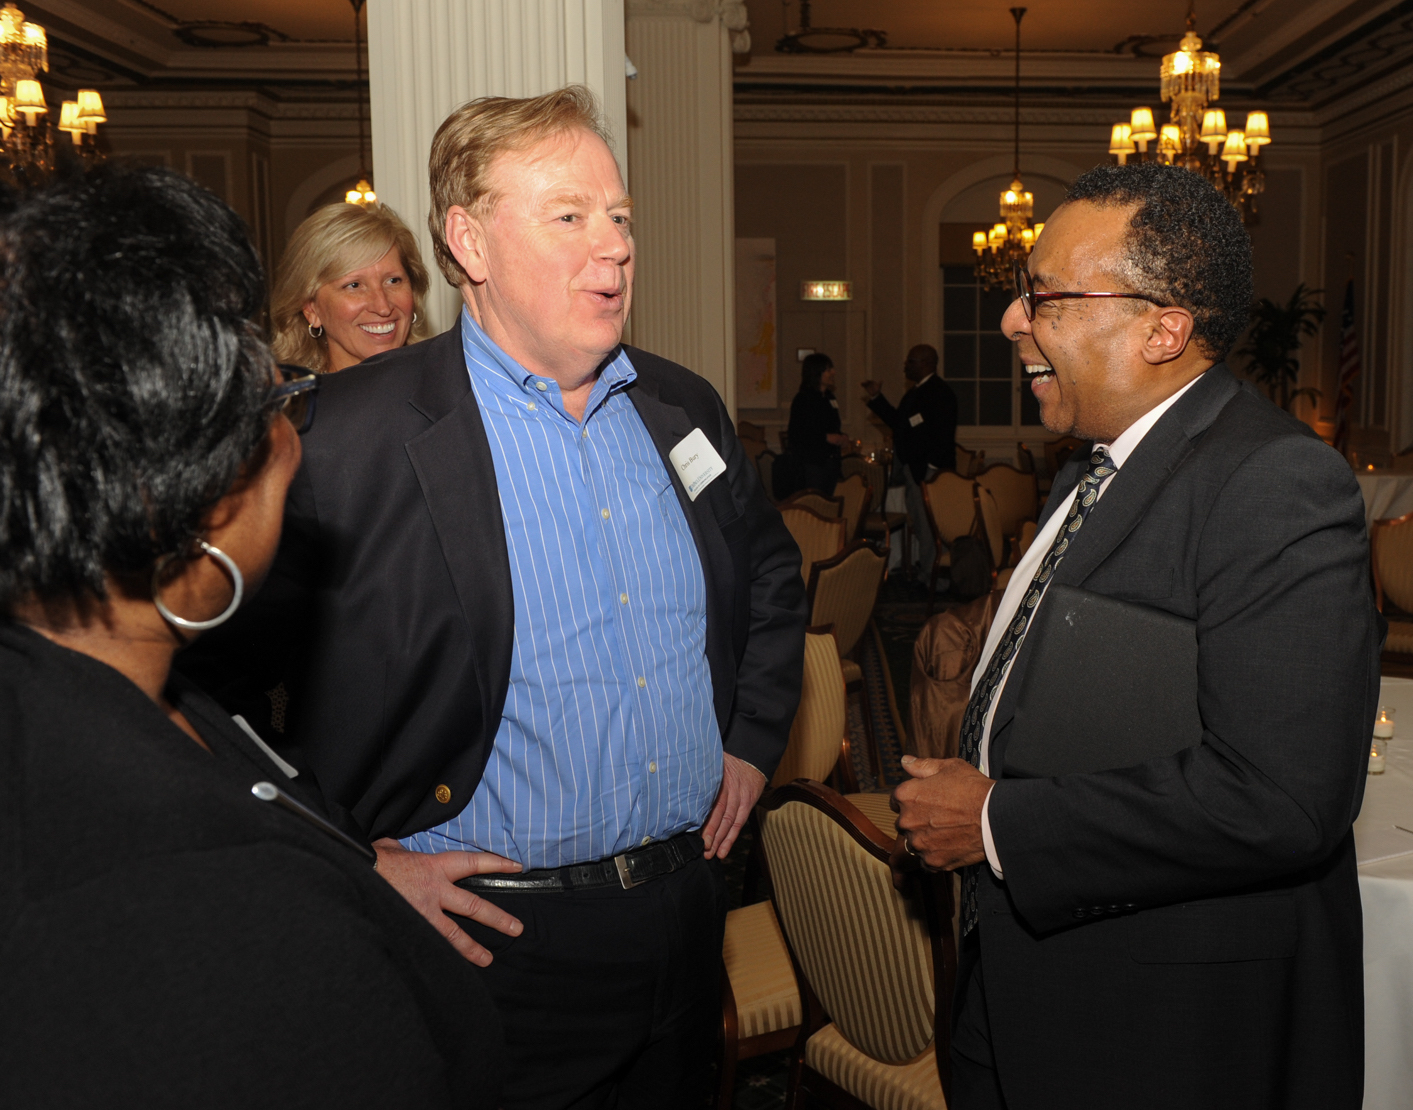 College of Communication Journalist-in-Residence Chris Bury and Clarence Page share a few words. (Photo by Paul Berg.)